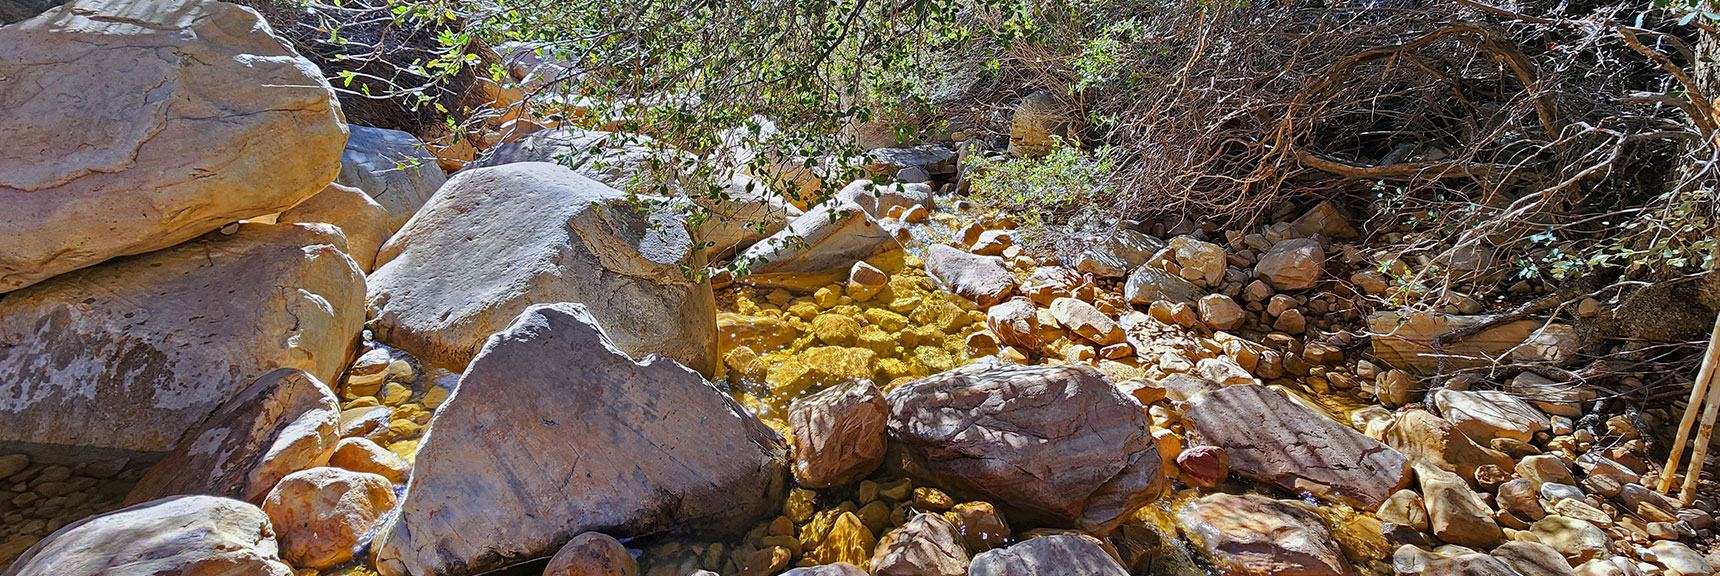 Sounds of Beautiful Singing Creek Always Present Throughout Canyon | Ice Box Canyon | Red Rock Canyon NCA, Nevada | Las Vegas Area Trails | David Smith